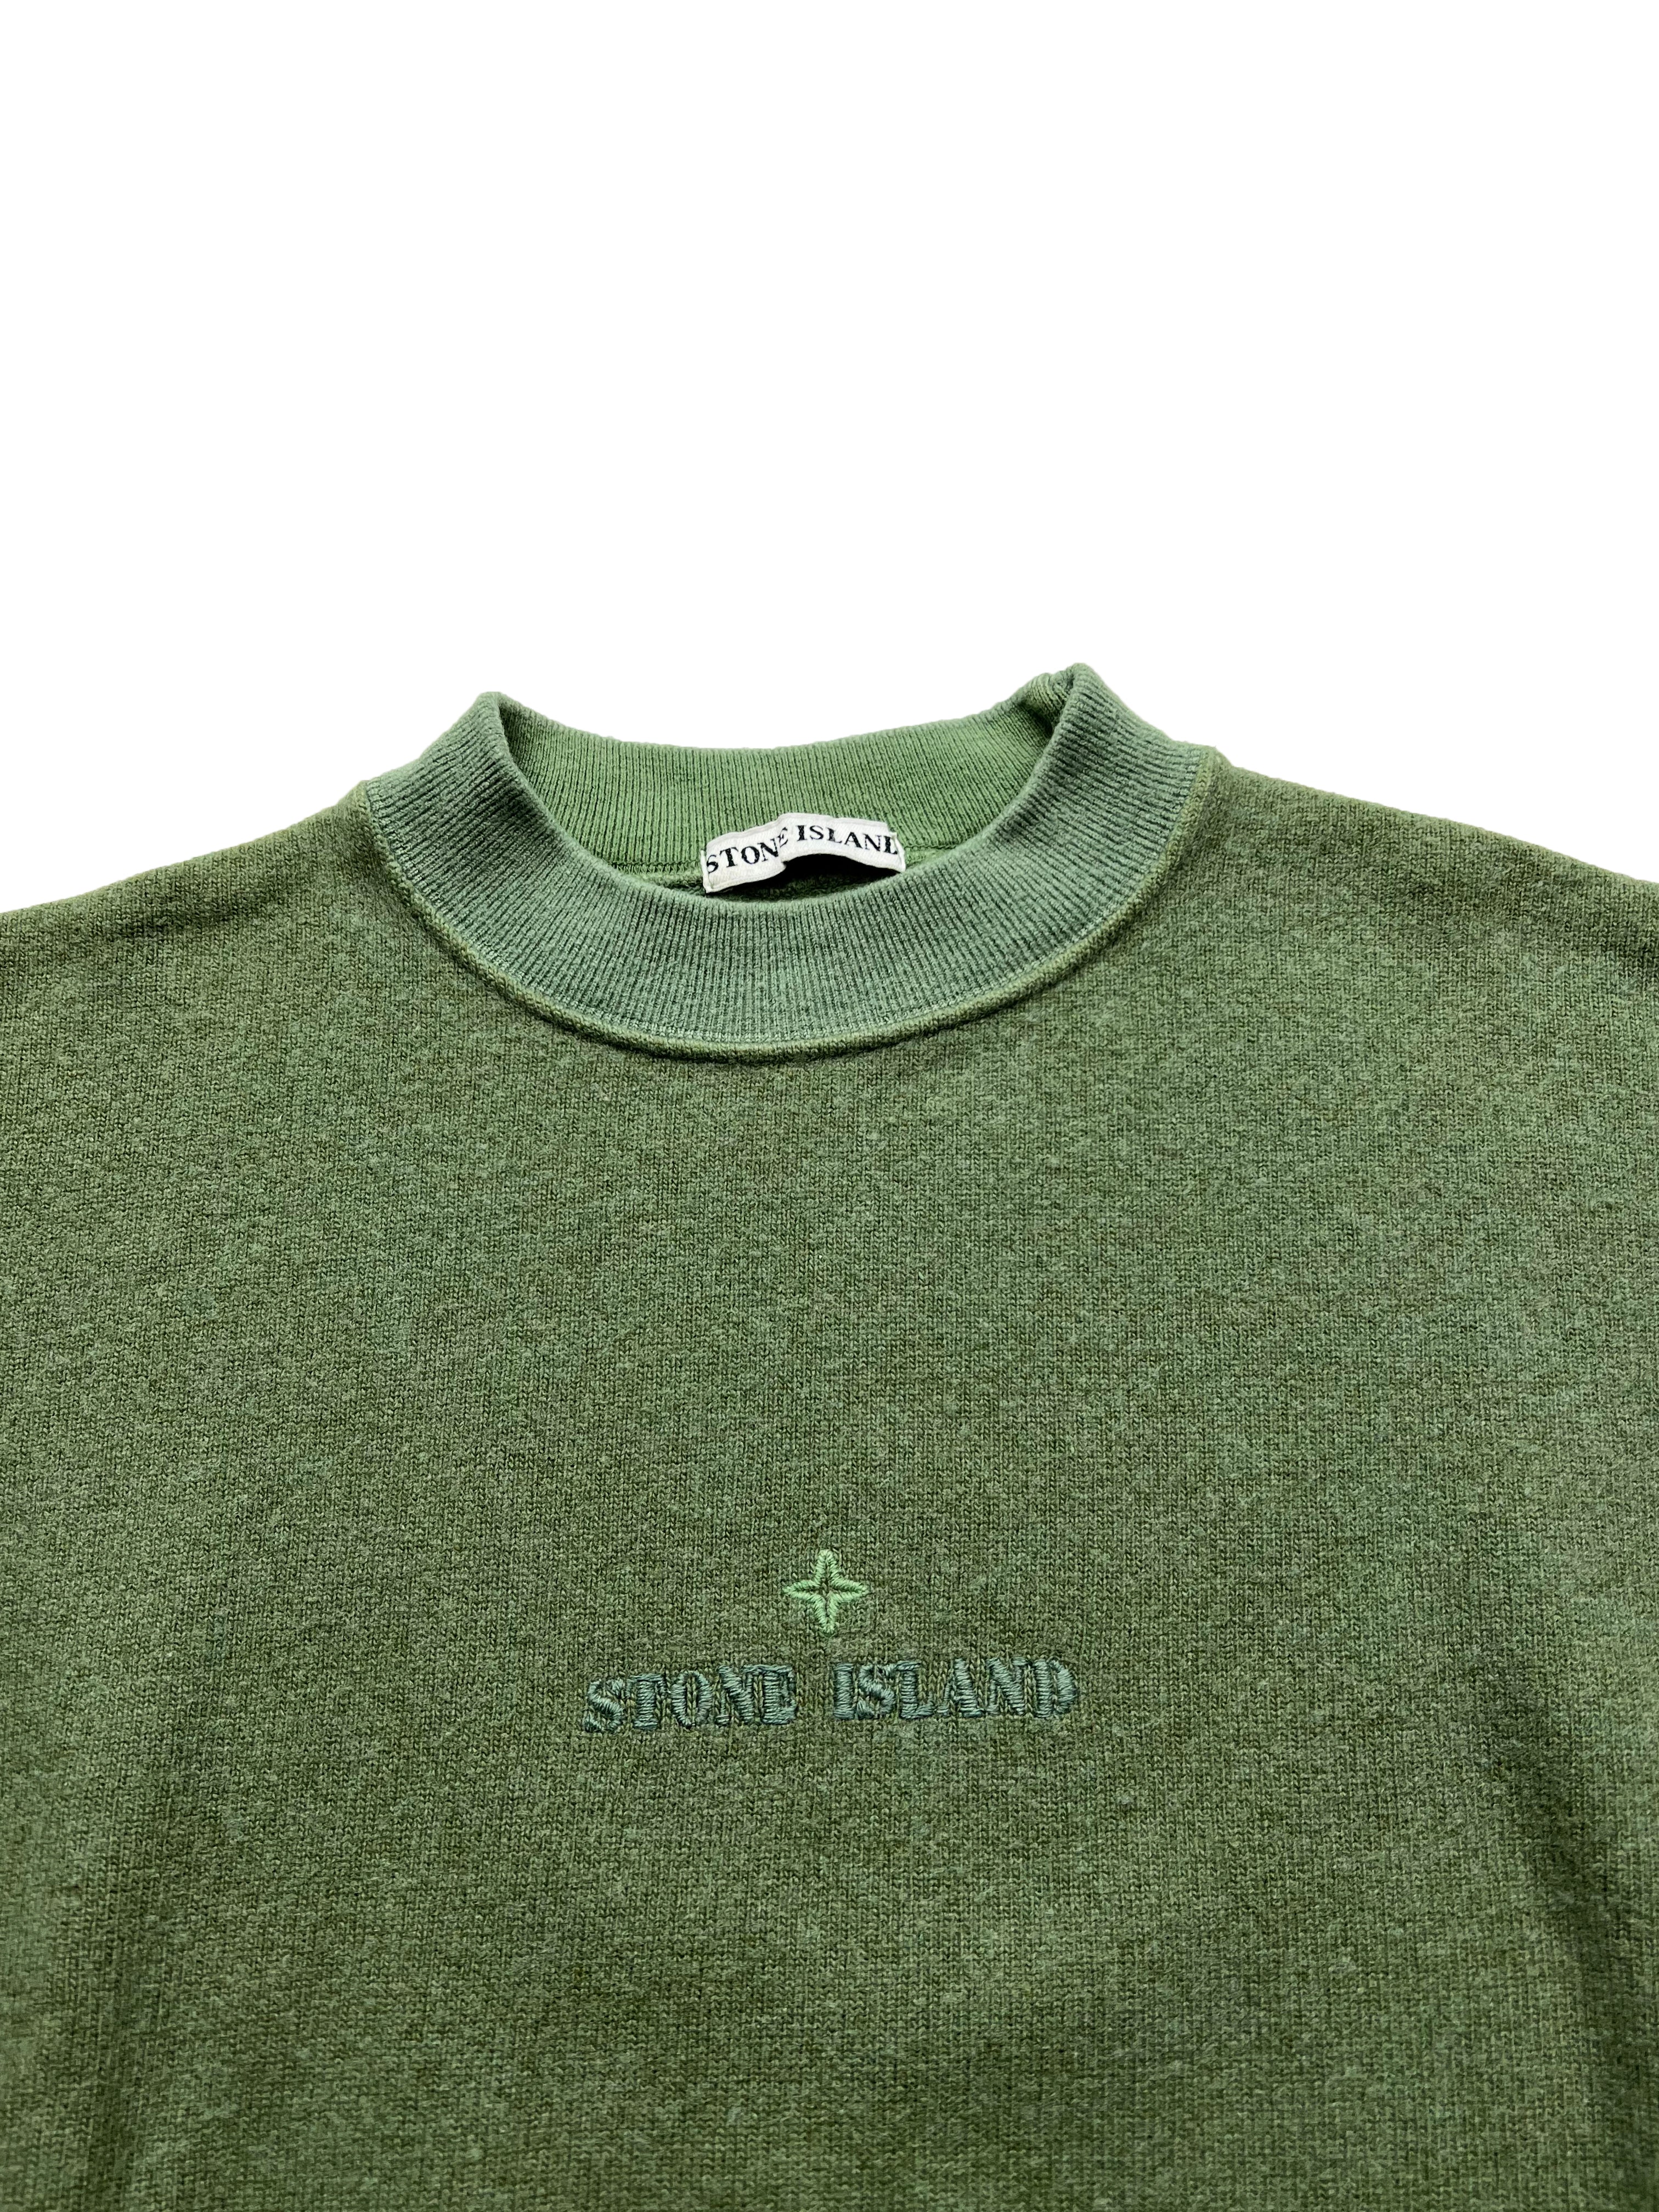 Stone island Khaki Spell Out Knit 1989